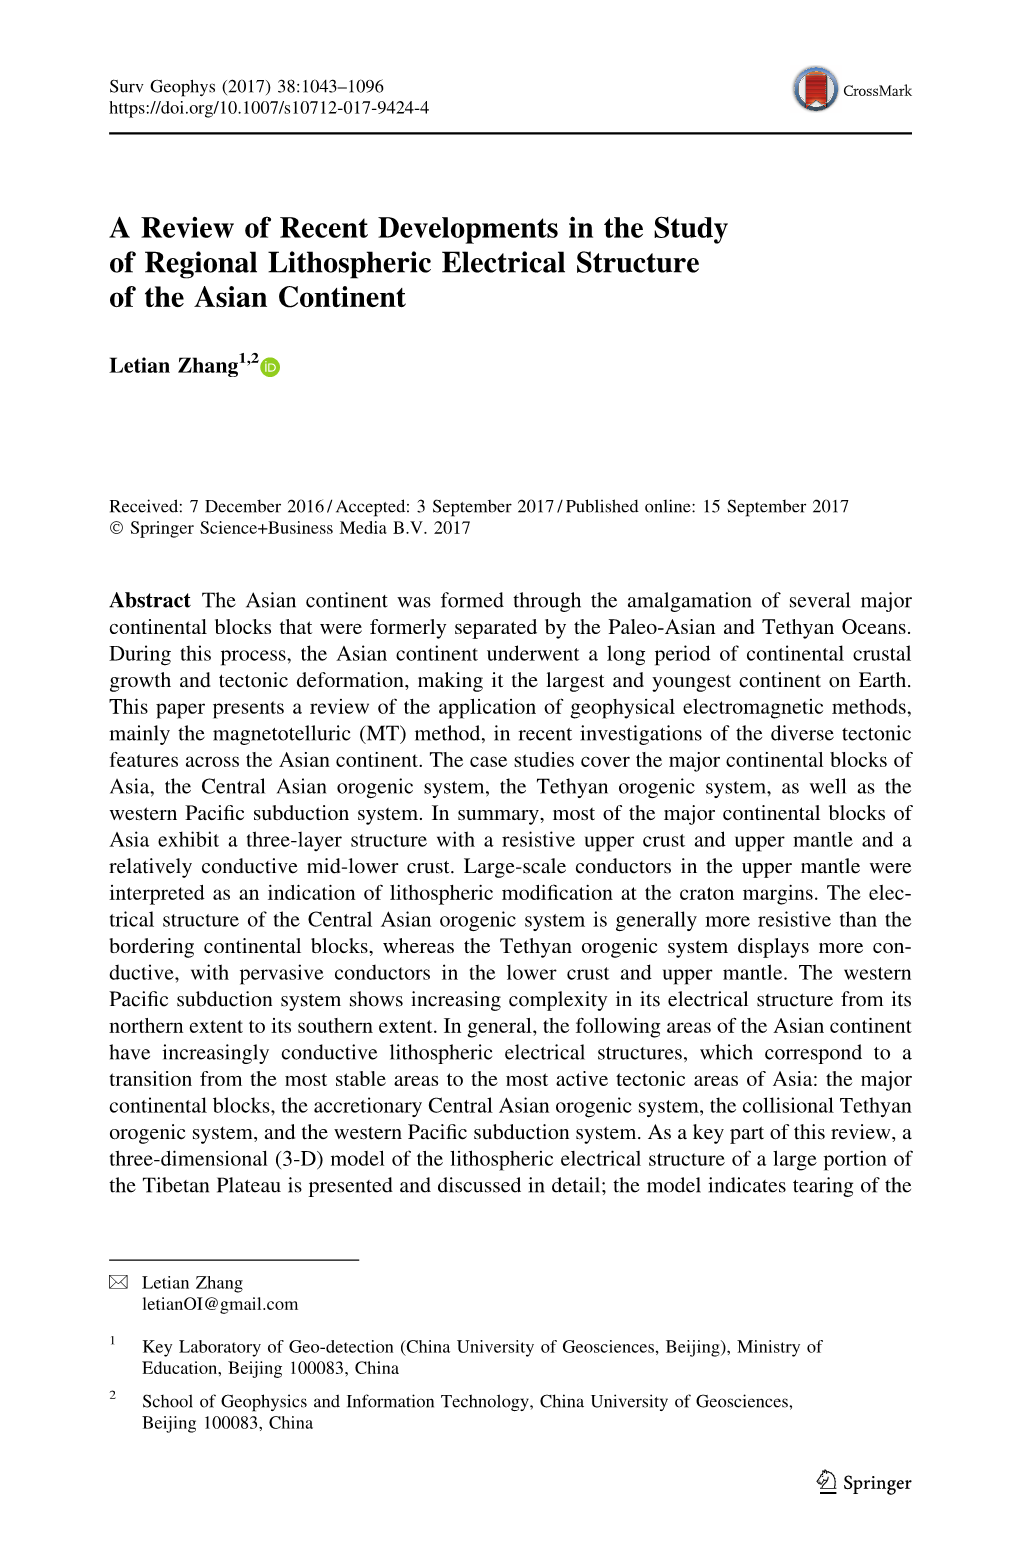 A Review of Recent Developments in the Study of Regional Lithospheric Electrical Structure of the Asian Continent